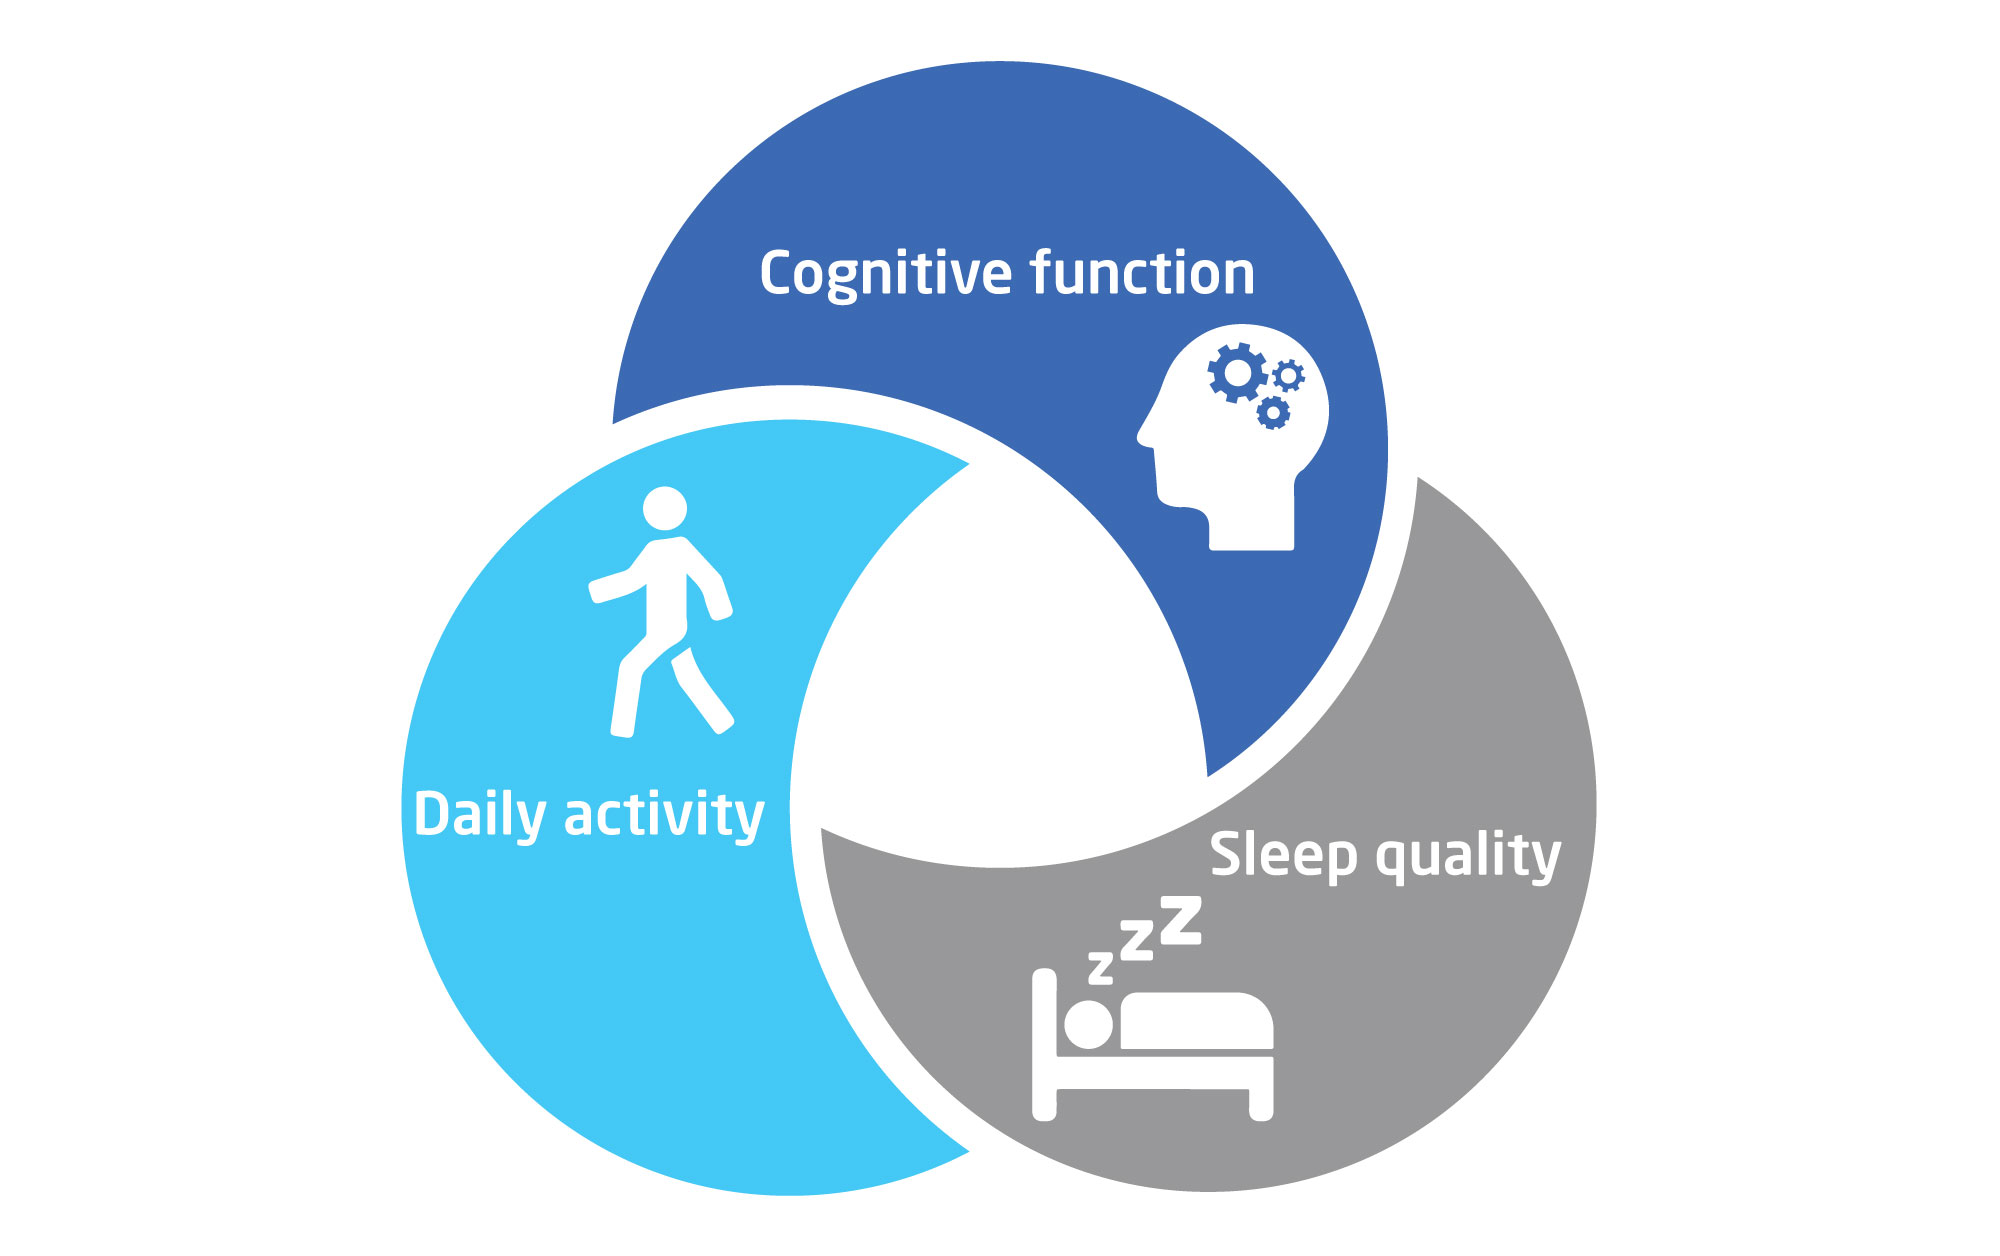 Walk, sleep and cognition